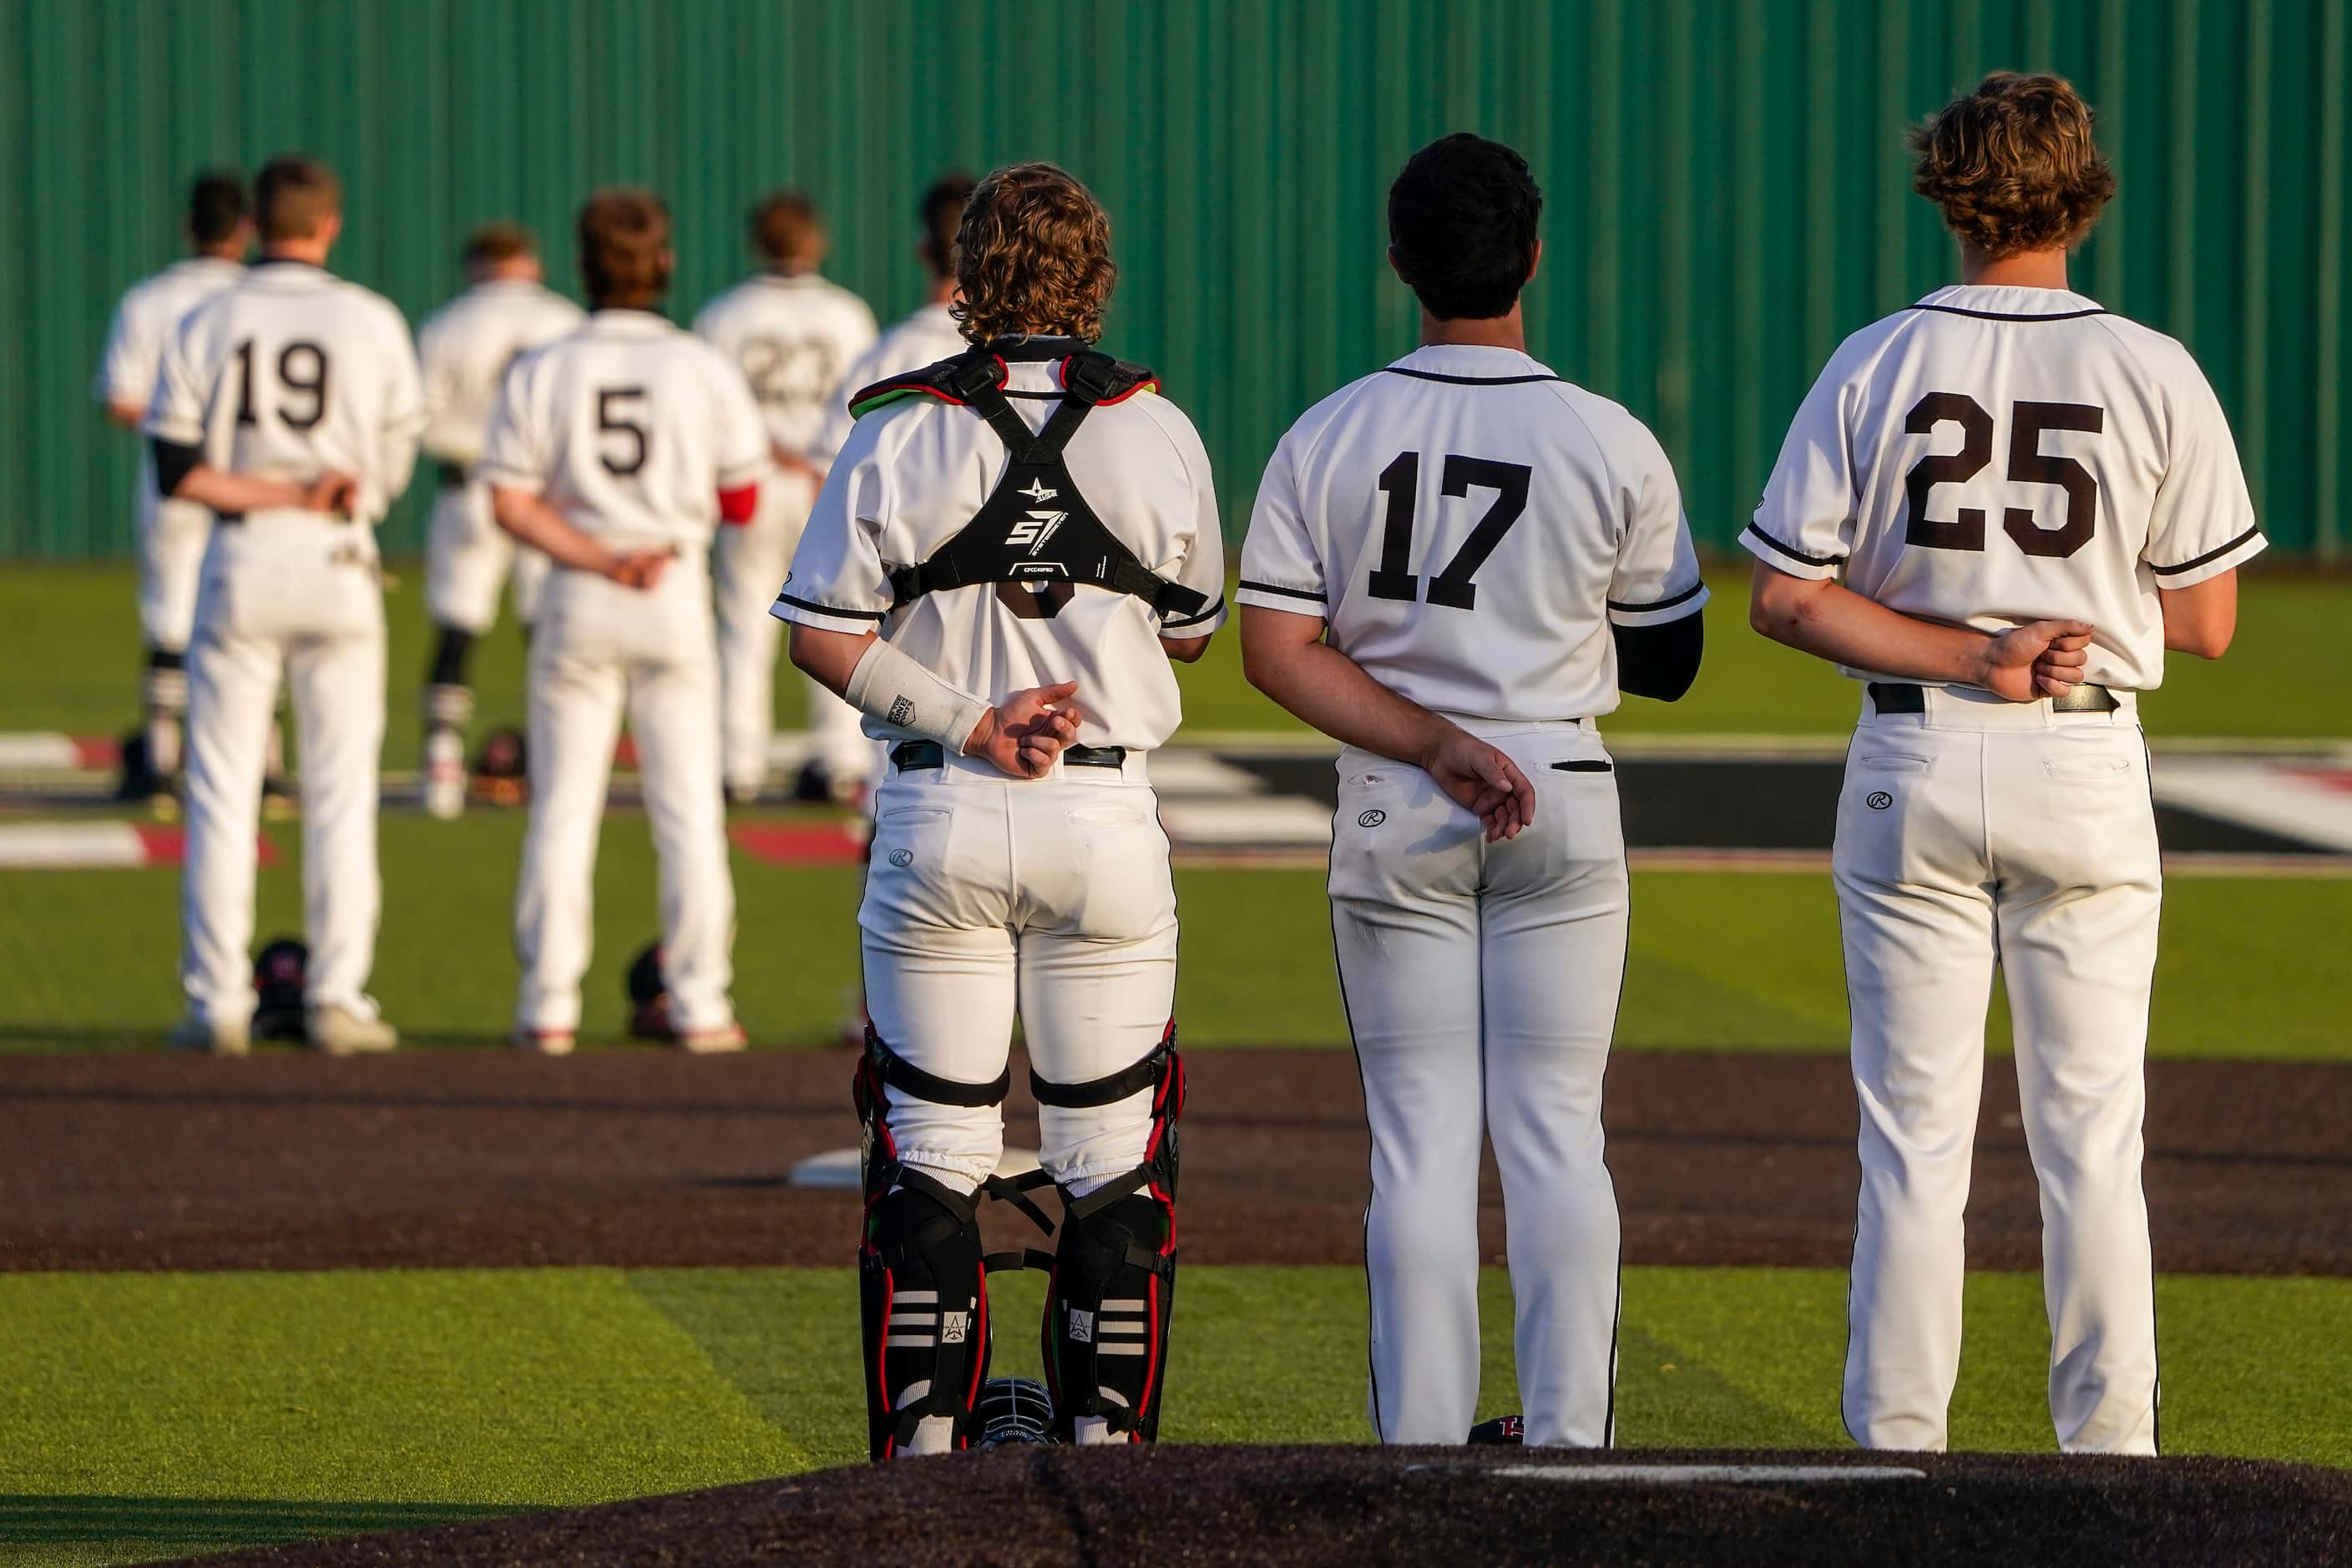 Rockwall-Heath players, including catcher Kevin Bazzell (9), pitcher Josh Hoover (17) and...